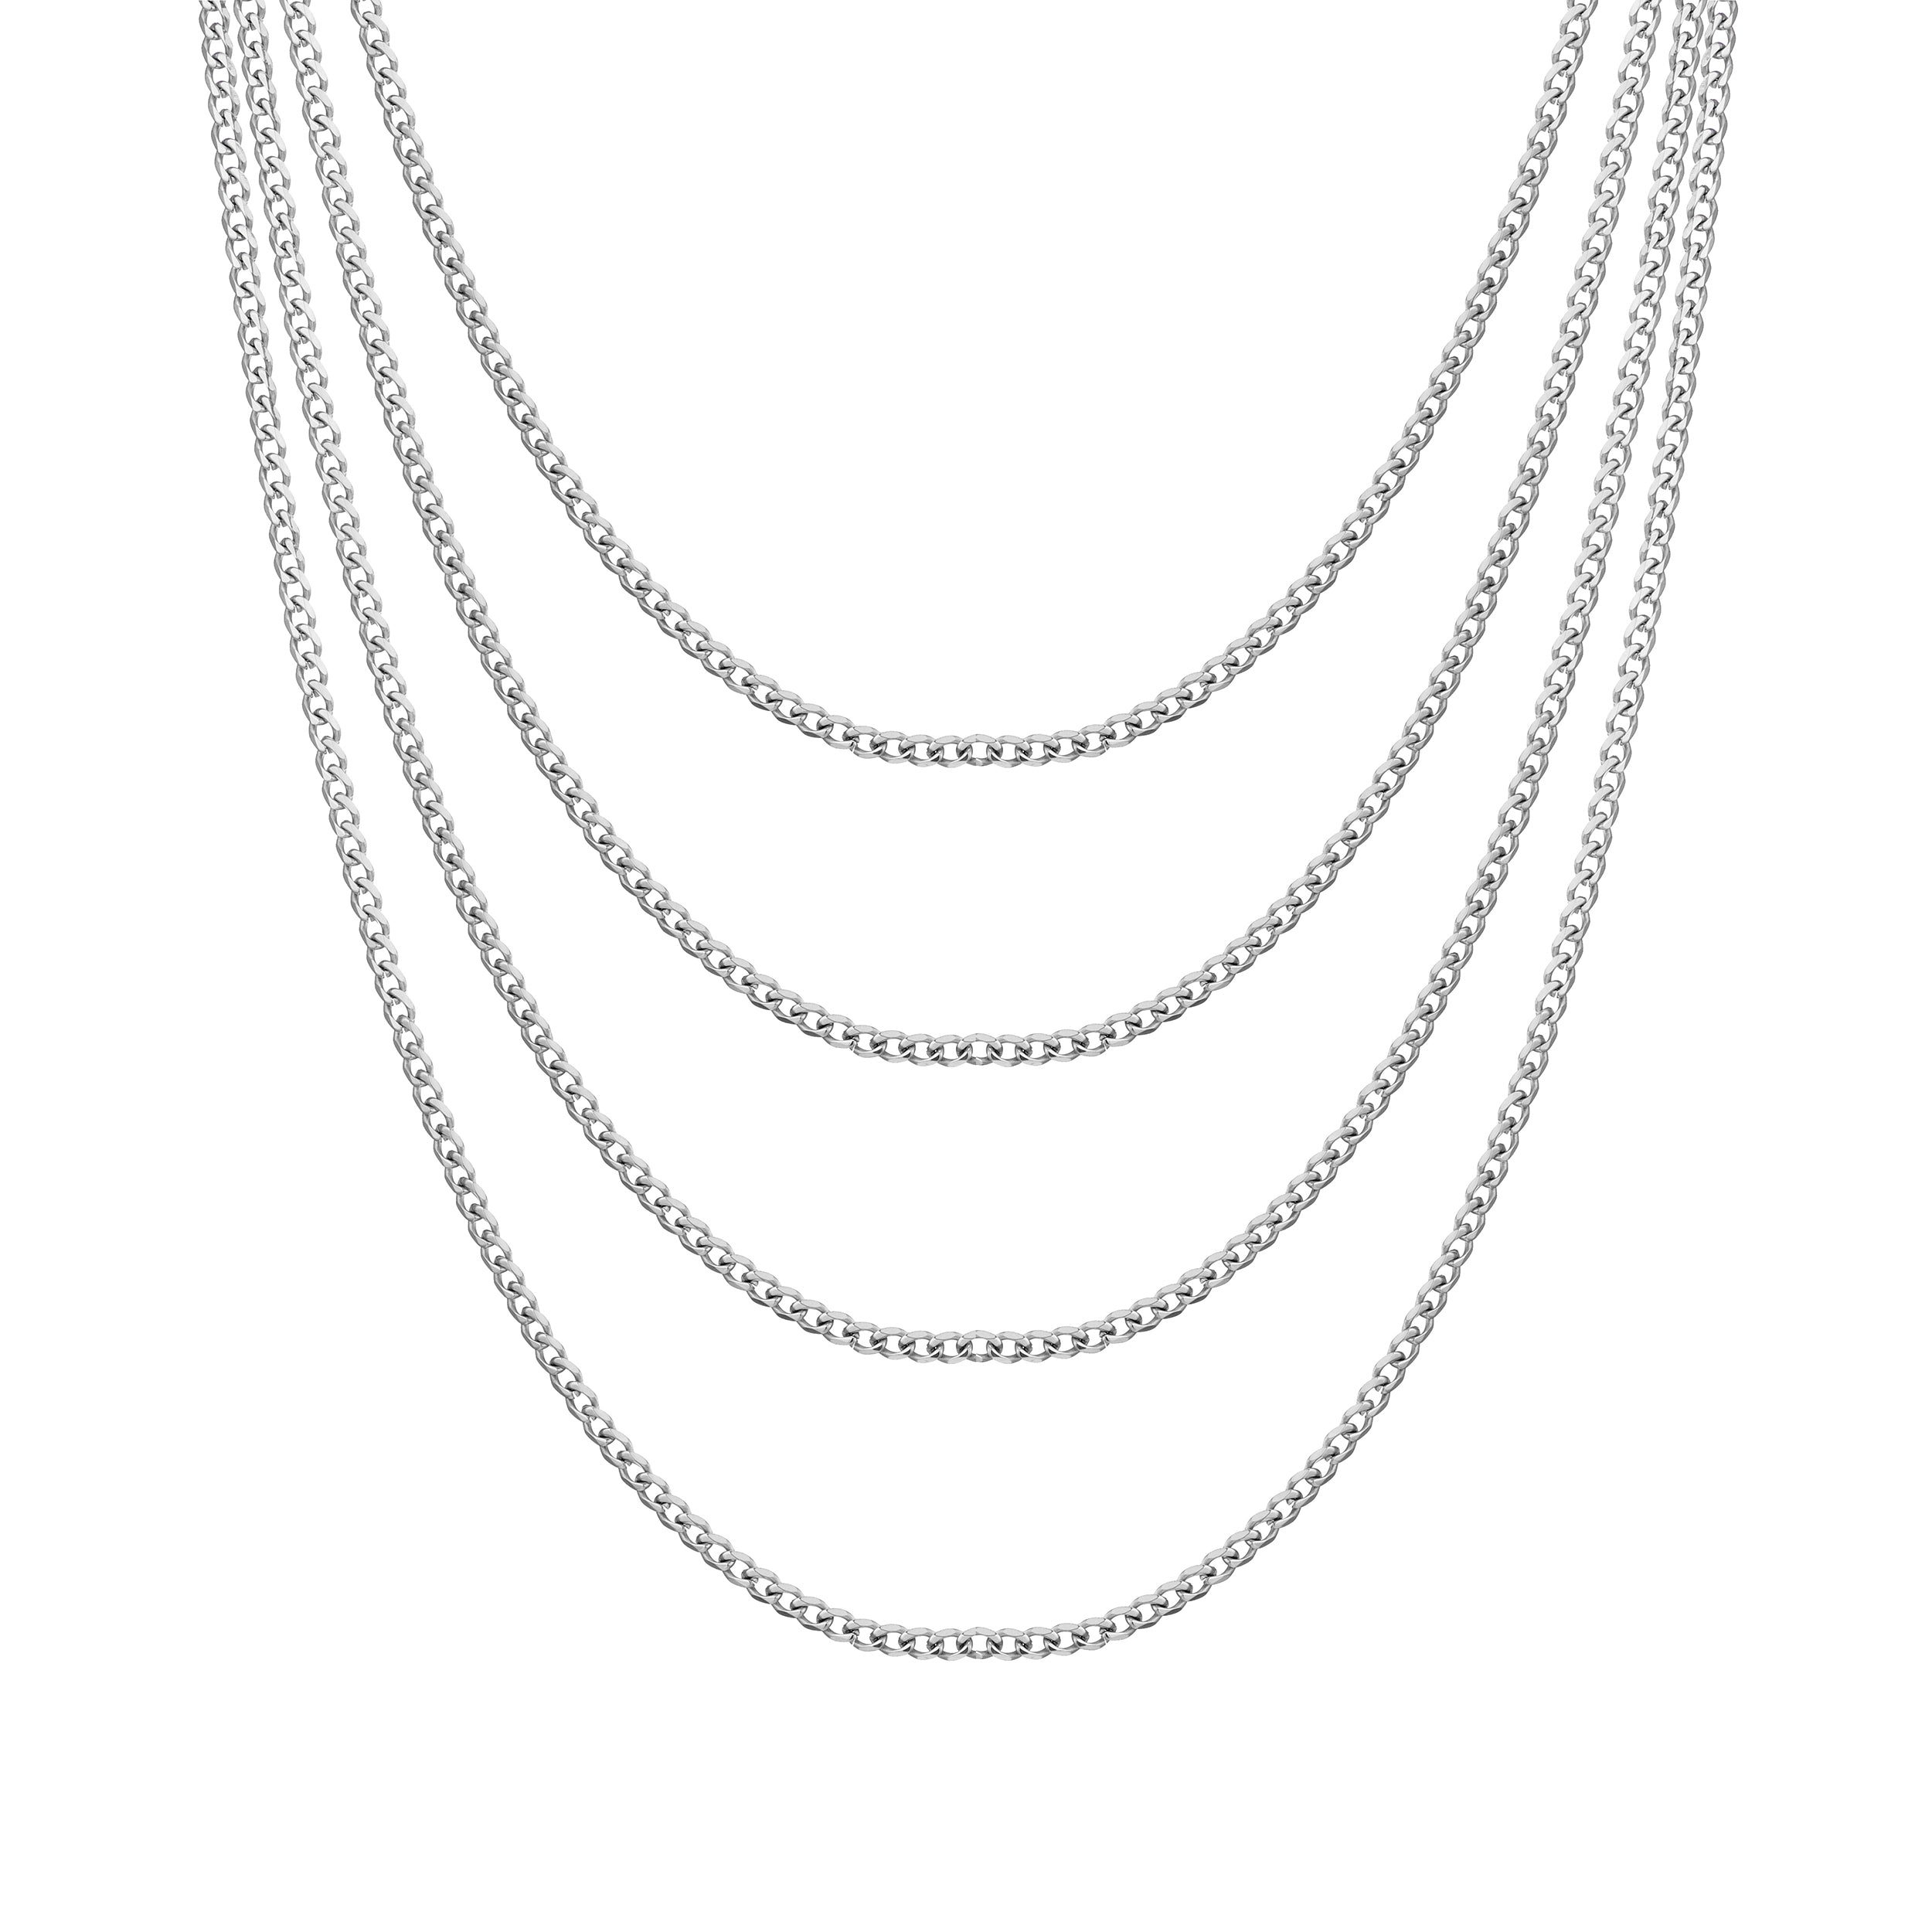 Men's 3mm Stainless Steel 18-24 Inch Curb Chain Necklace by Philip Jones Jewellery